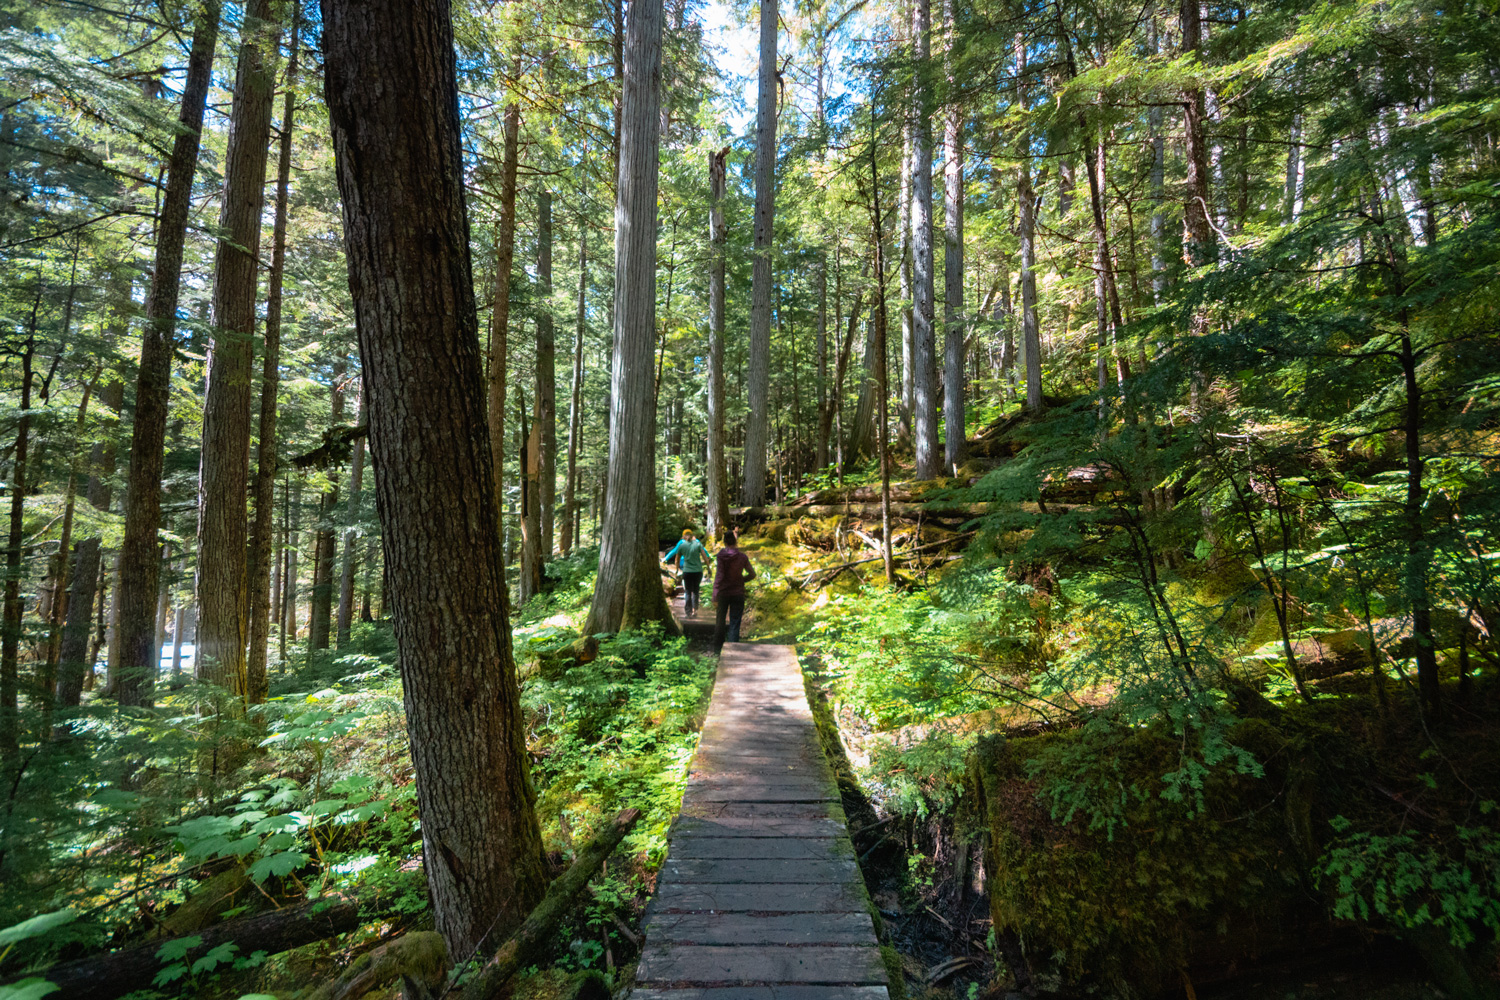 Boardwalk through a moss and tree lined hiking trail to a big waterfall